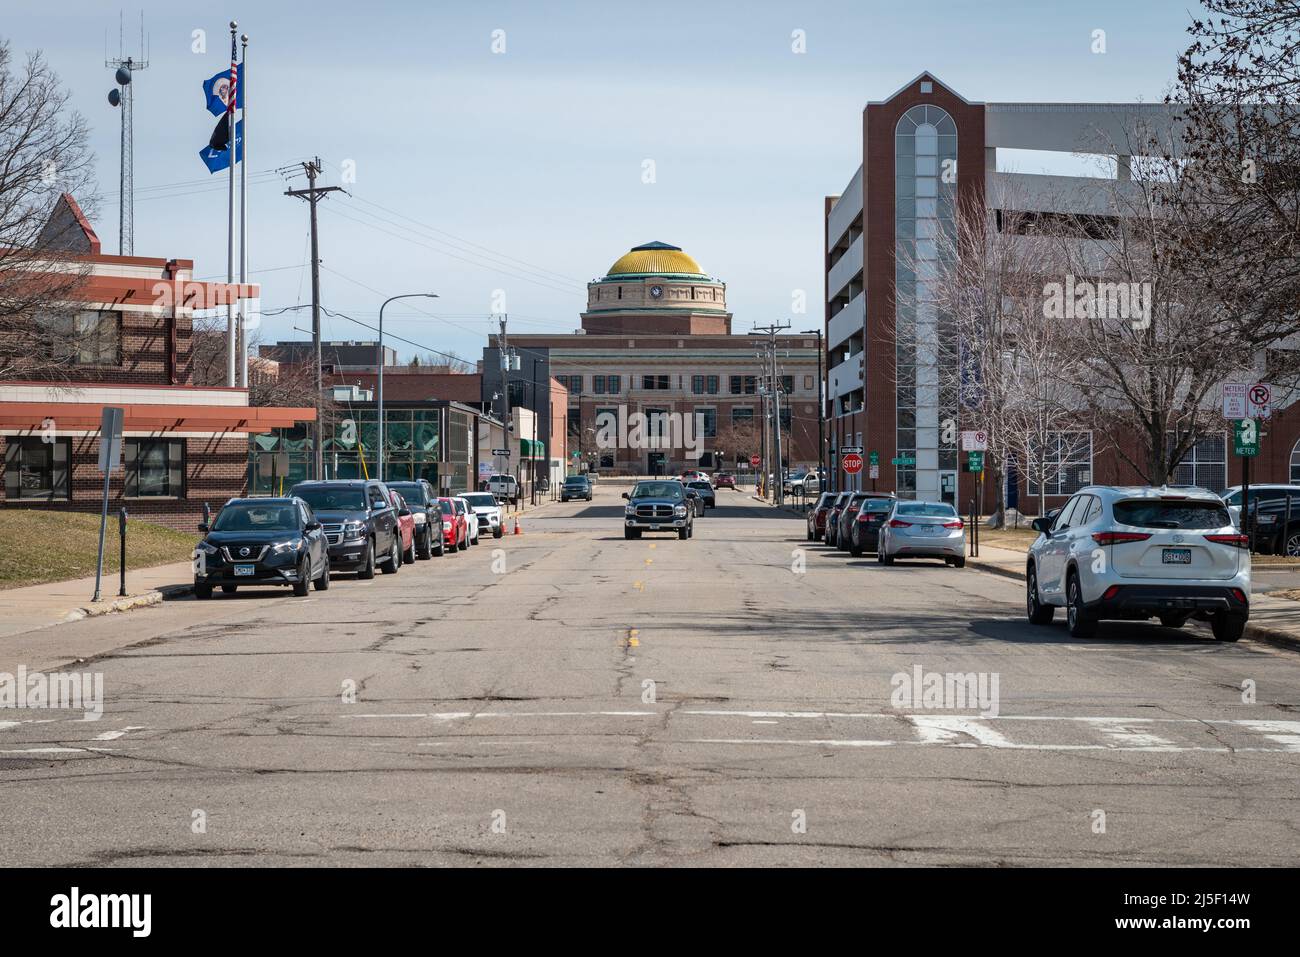 SAINT CLOUD, MINNESOTA - February 19, 2022: the Stearns County Courthouse is photographed from the opposite end of 1st Street N. Stock Photo